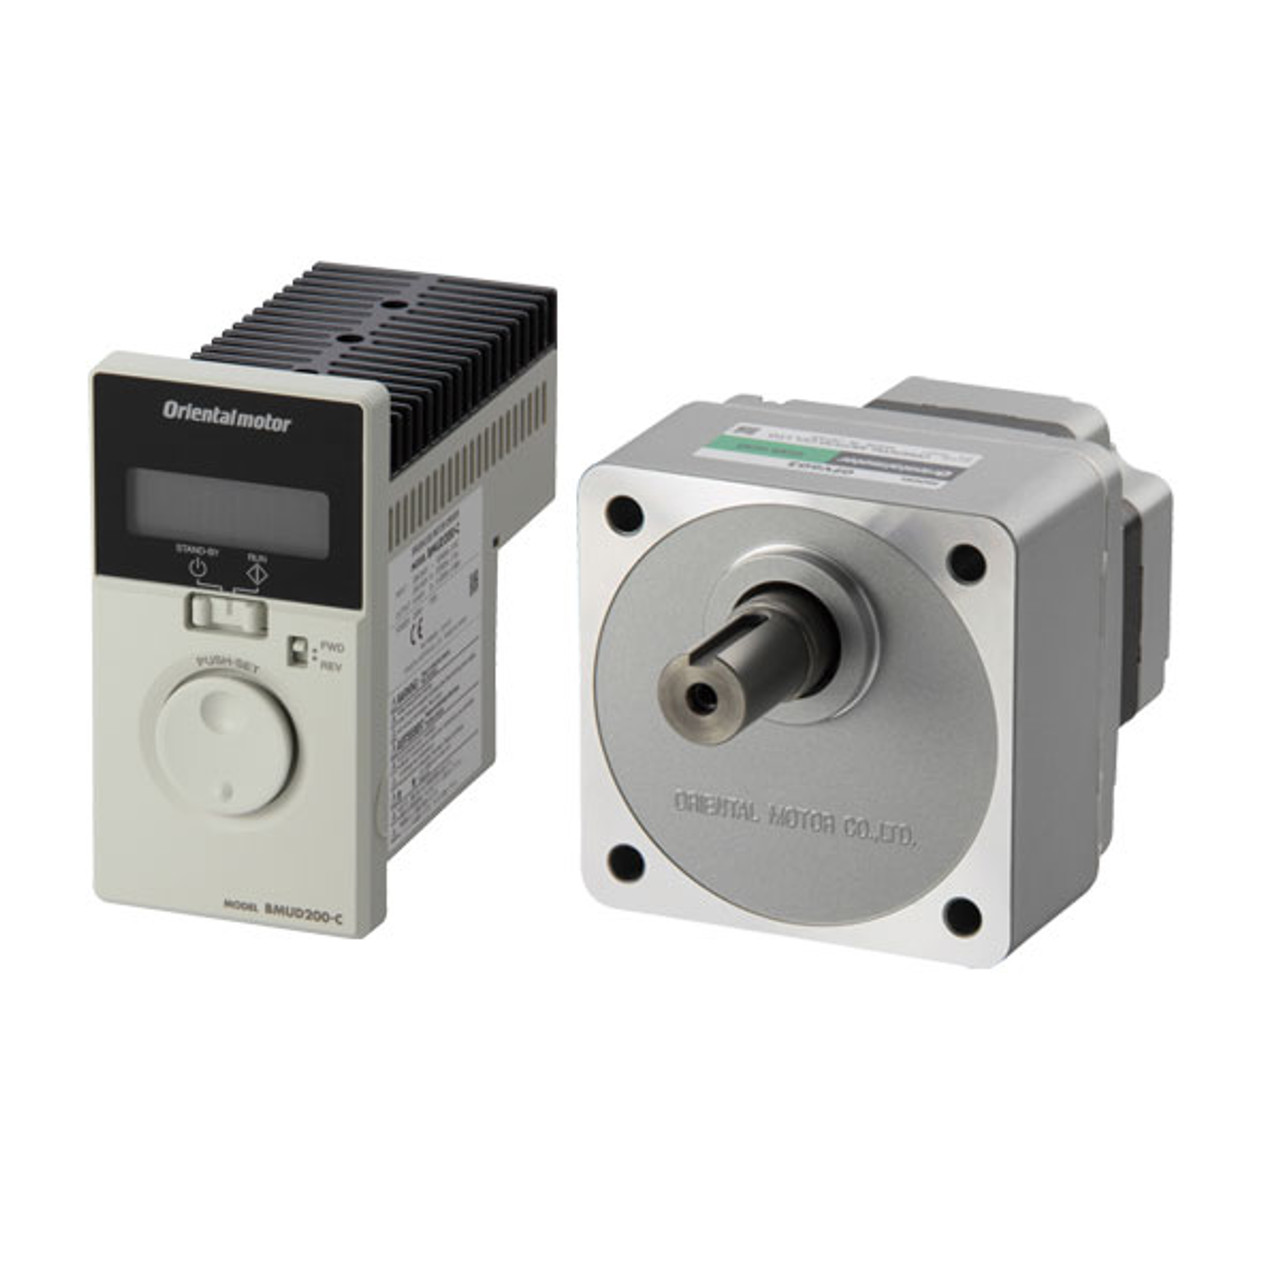 BMU6200SCP-100A - Product Image